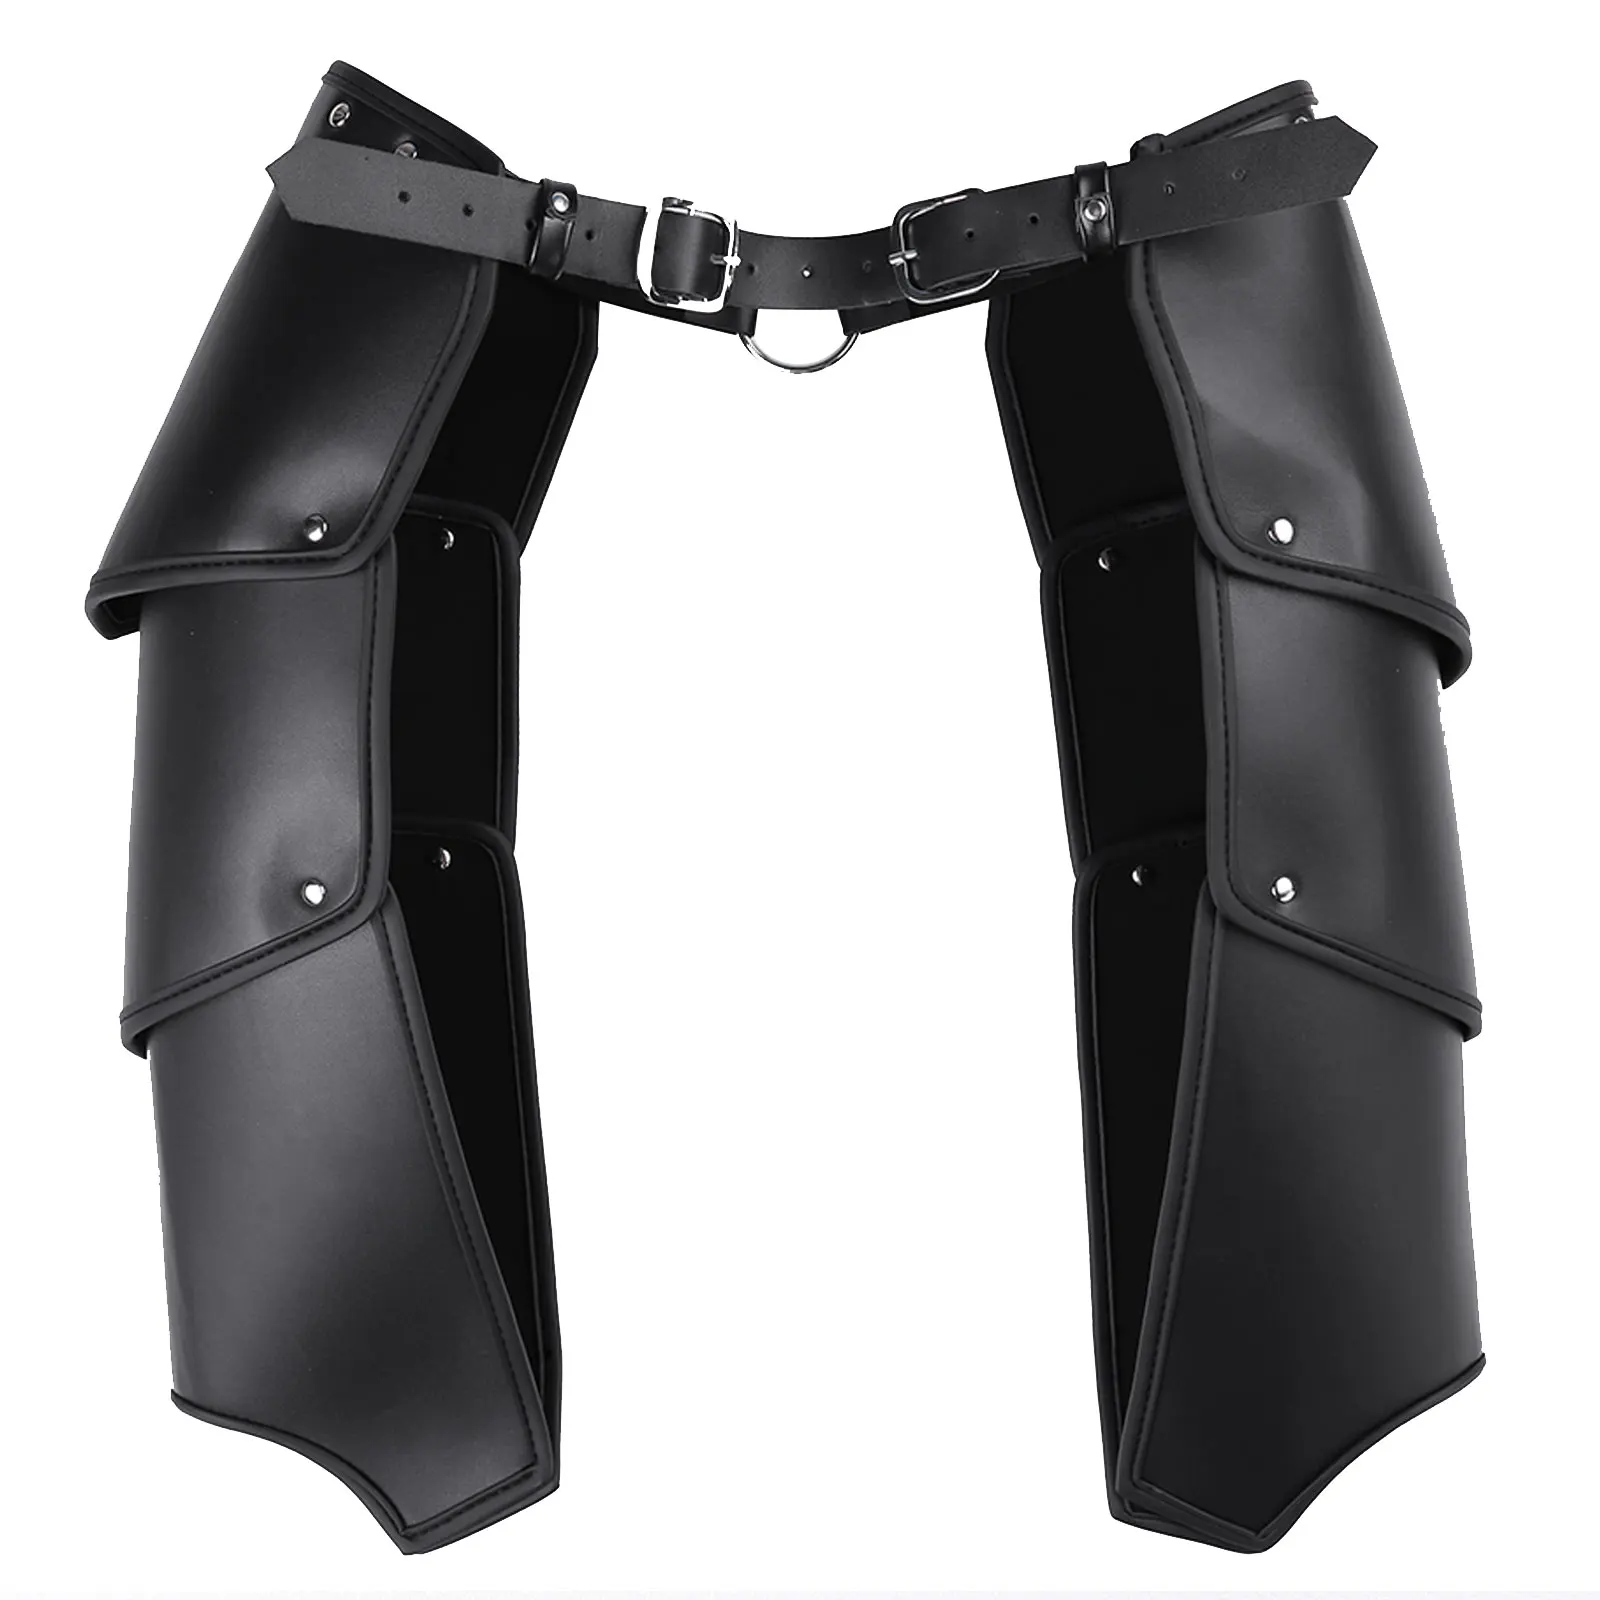 Mens Wetlook Vintage Faux Leather Leg Armors Vest Body Waist Harness Strap Party Cosplay Halloween Club Performance Costume